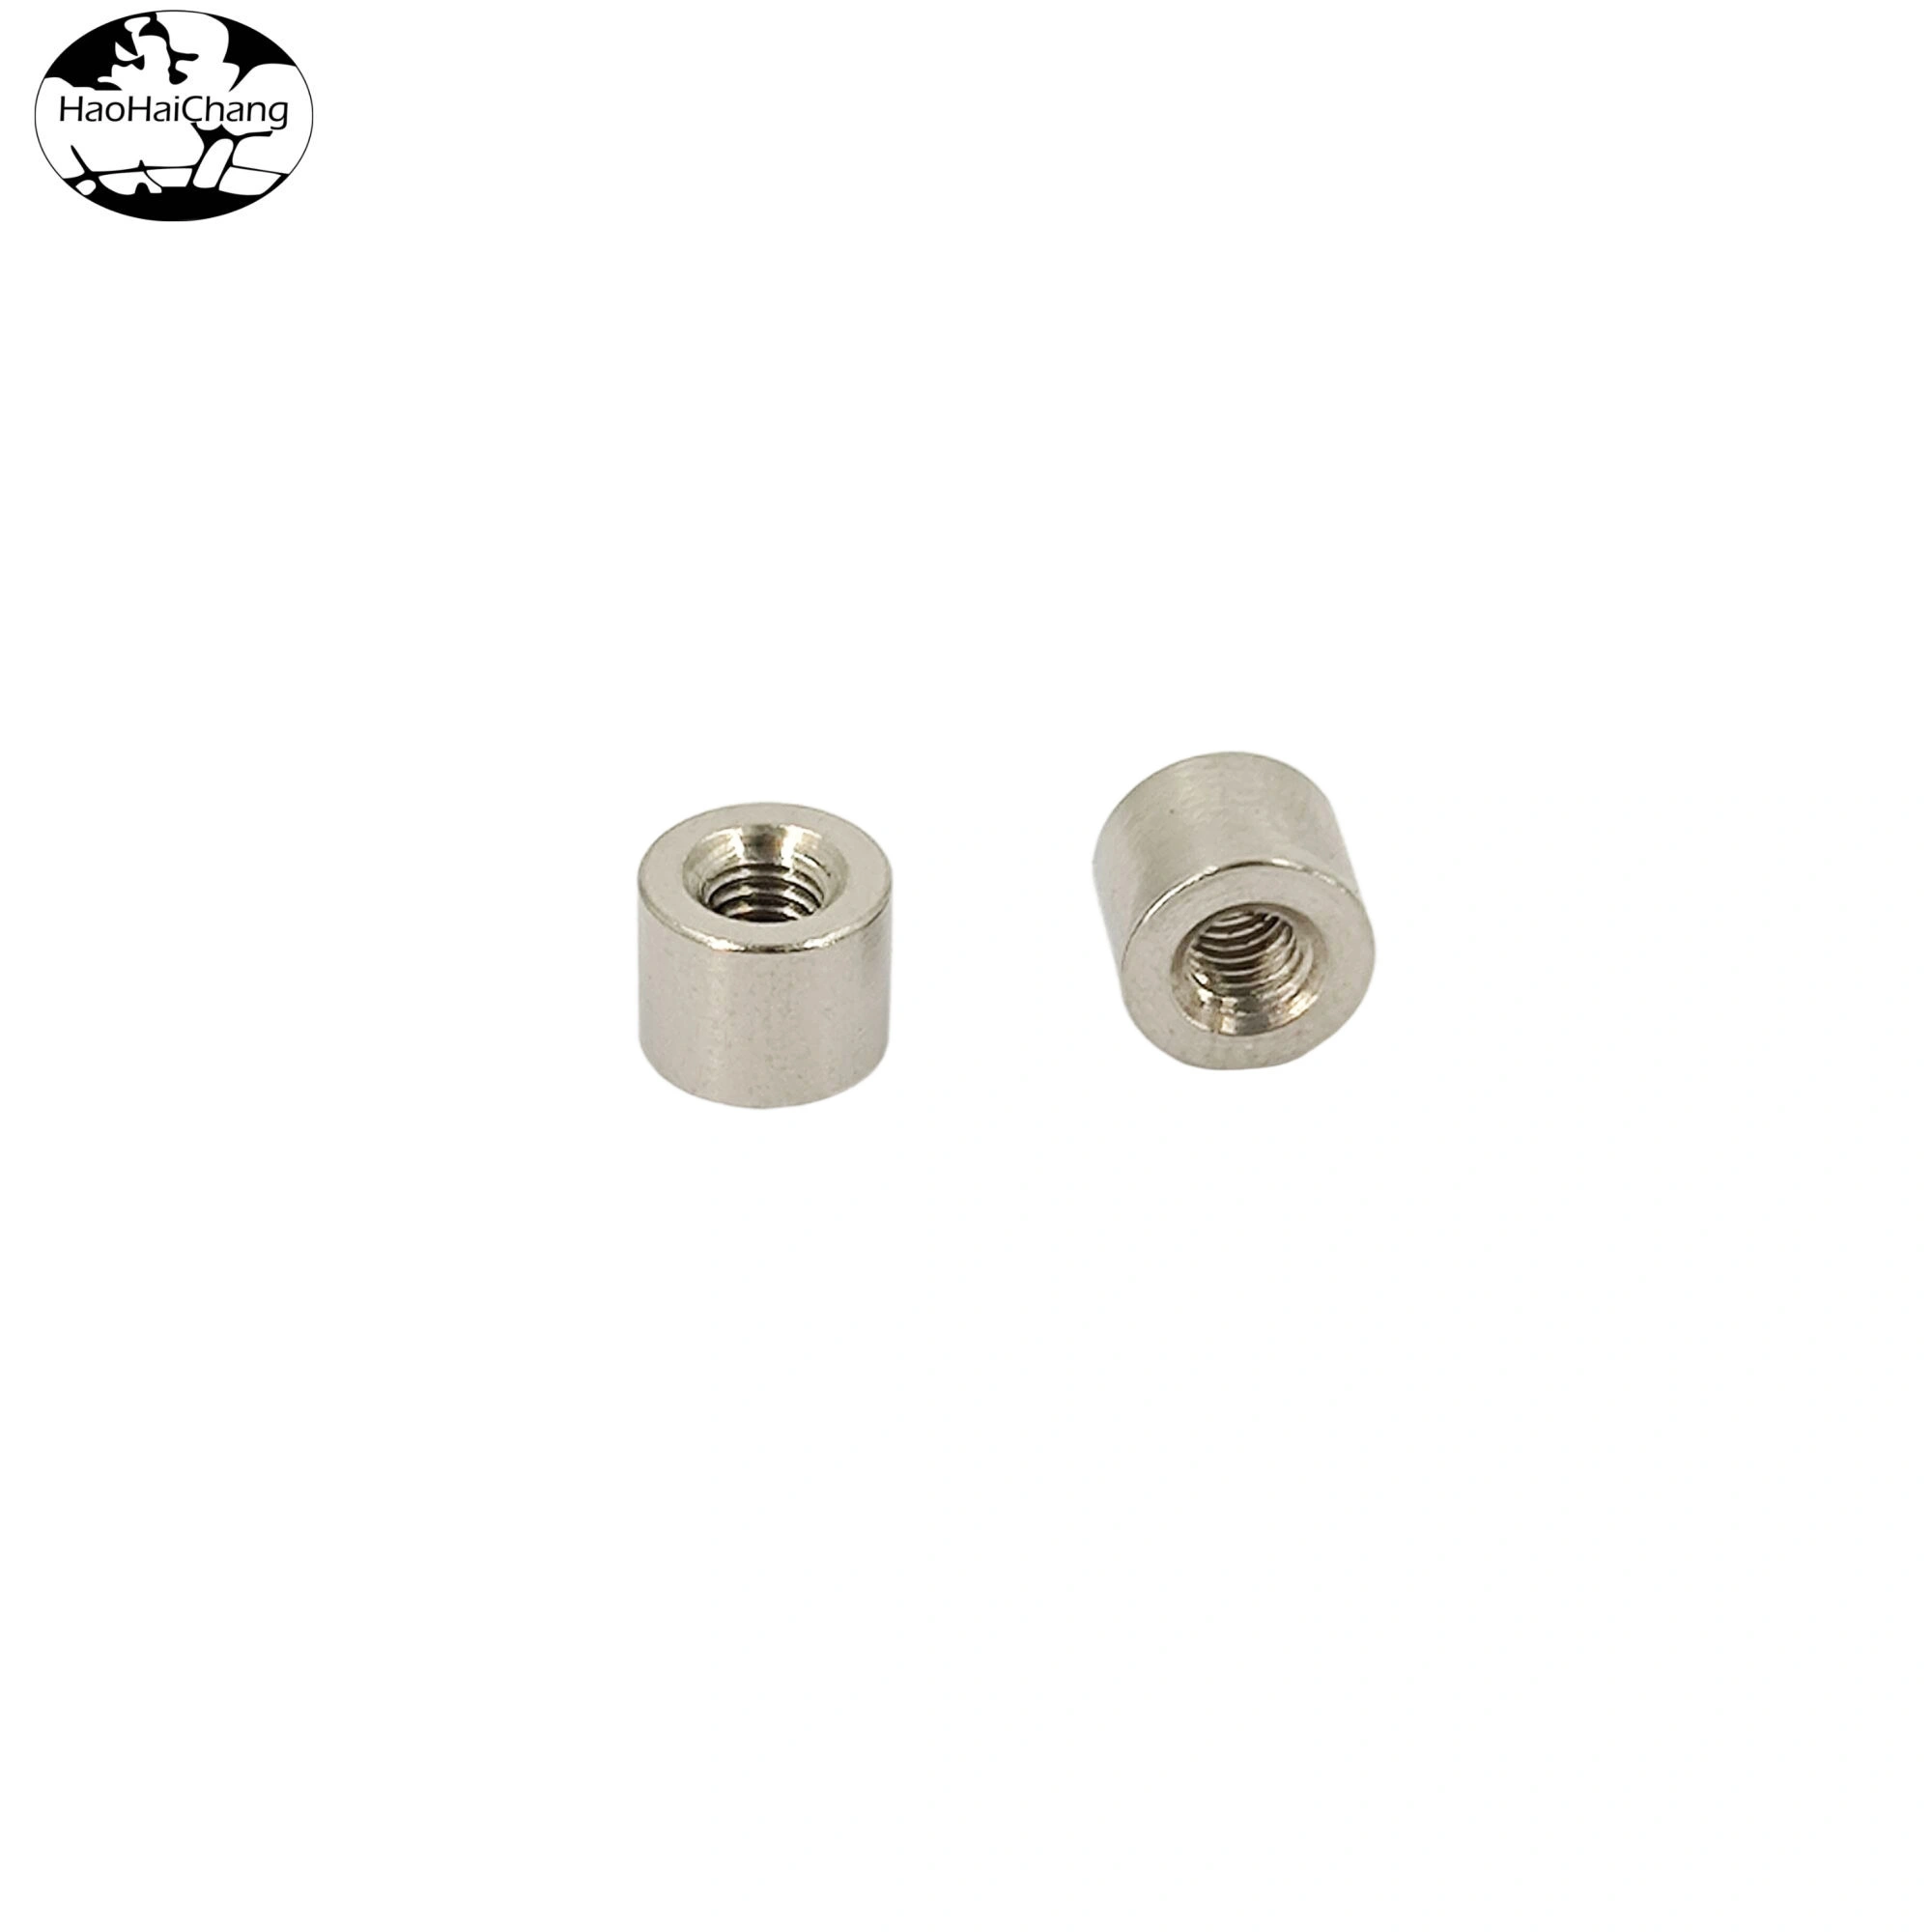 HHC-605 Stainless Steel Round Nut Connecting Nut Cylindrical Screw Joint